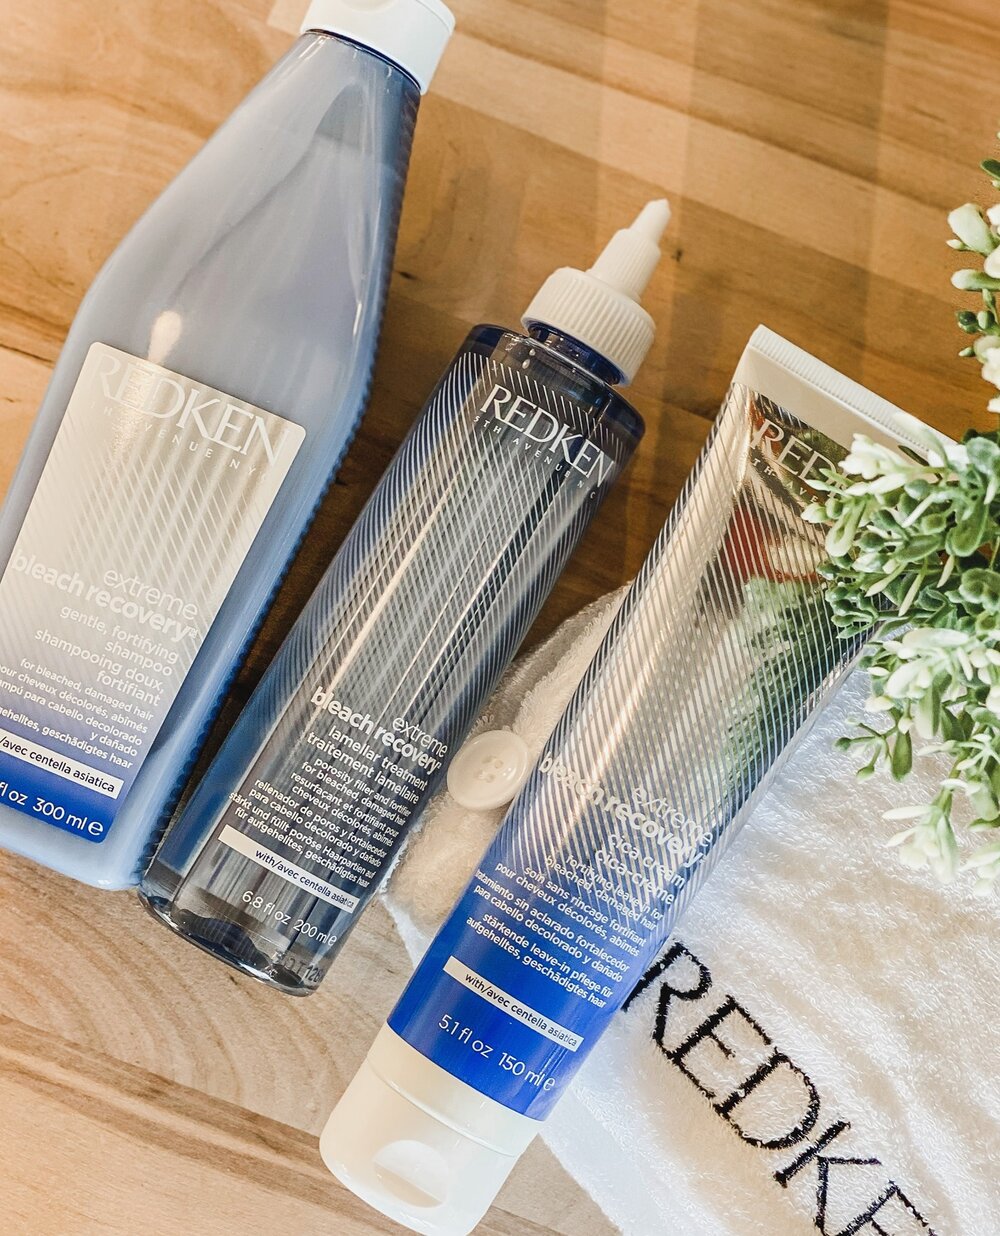 ✨Bleach, SOS!✨⁠
⁠
We love a good blonde moment, but it can come at a cost. Chemical processing can leave your hair needed a little extra TLC and @redken has formulated just the type of care your chemically treated hair needs!⁠
⁠
This ultra-pampering 